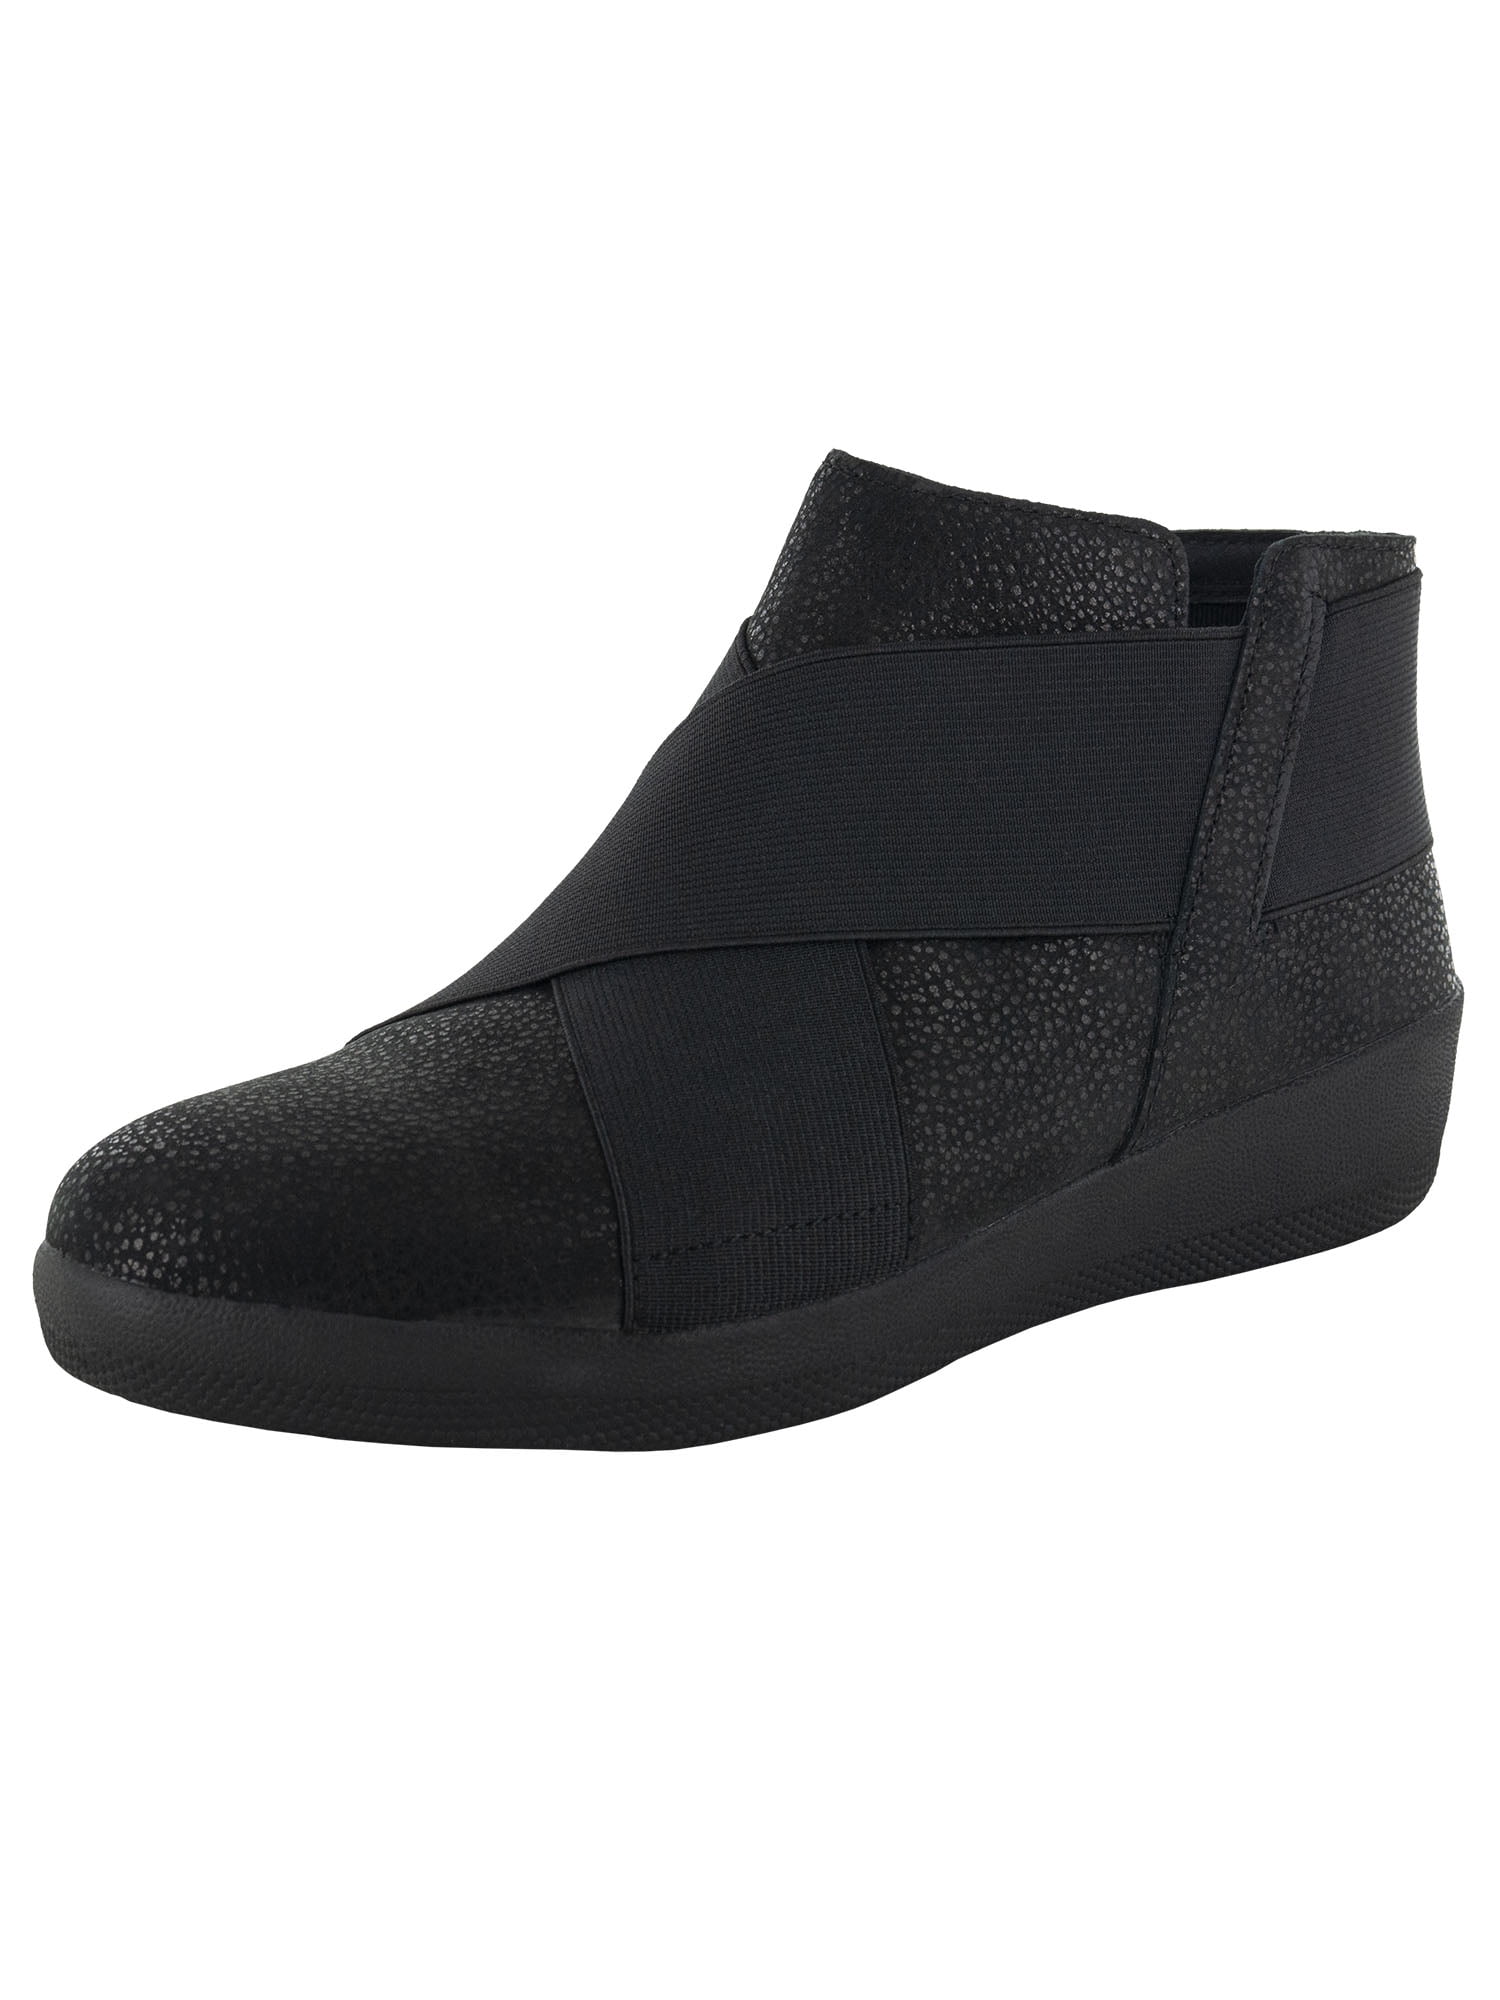 Fitflop Womens Superflex Pebbled Leather Bootie Shoes, Black, US 5 ...